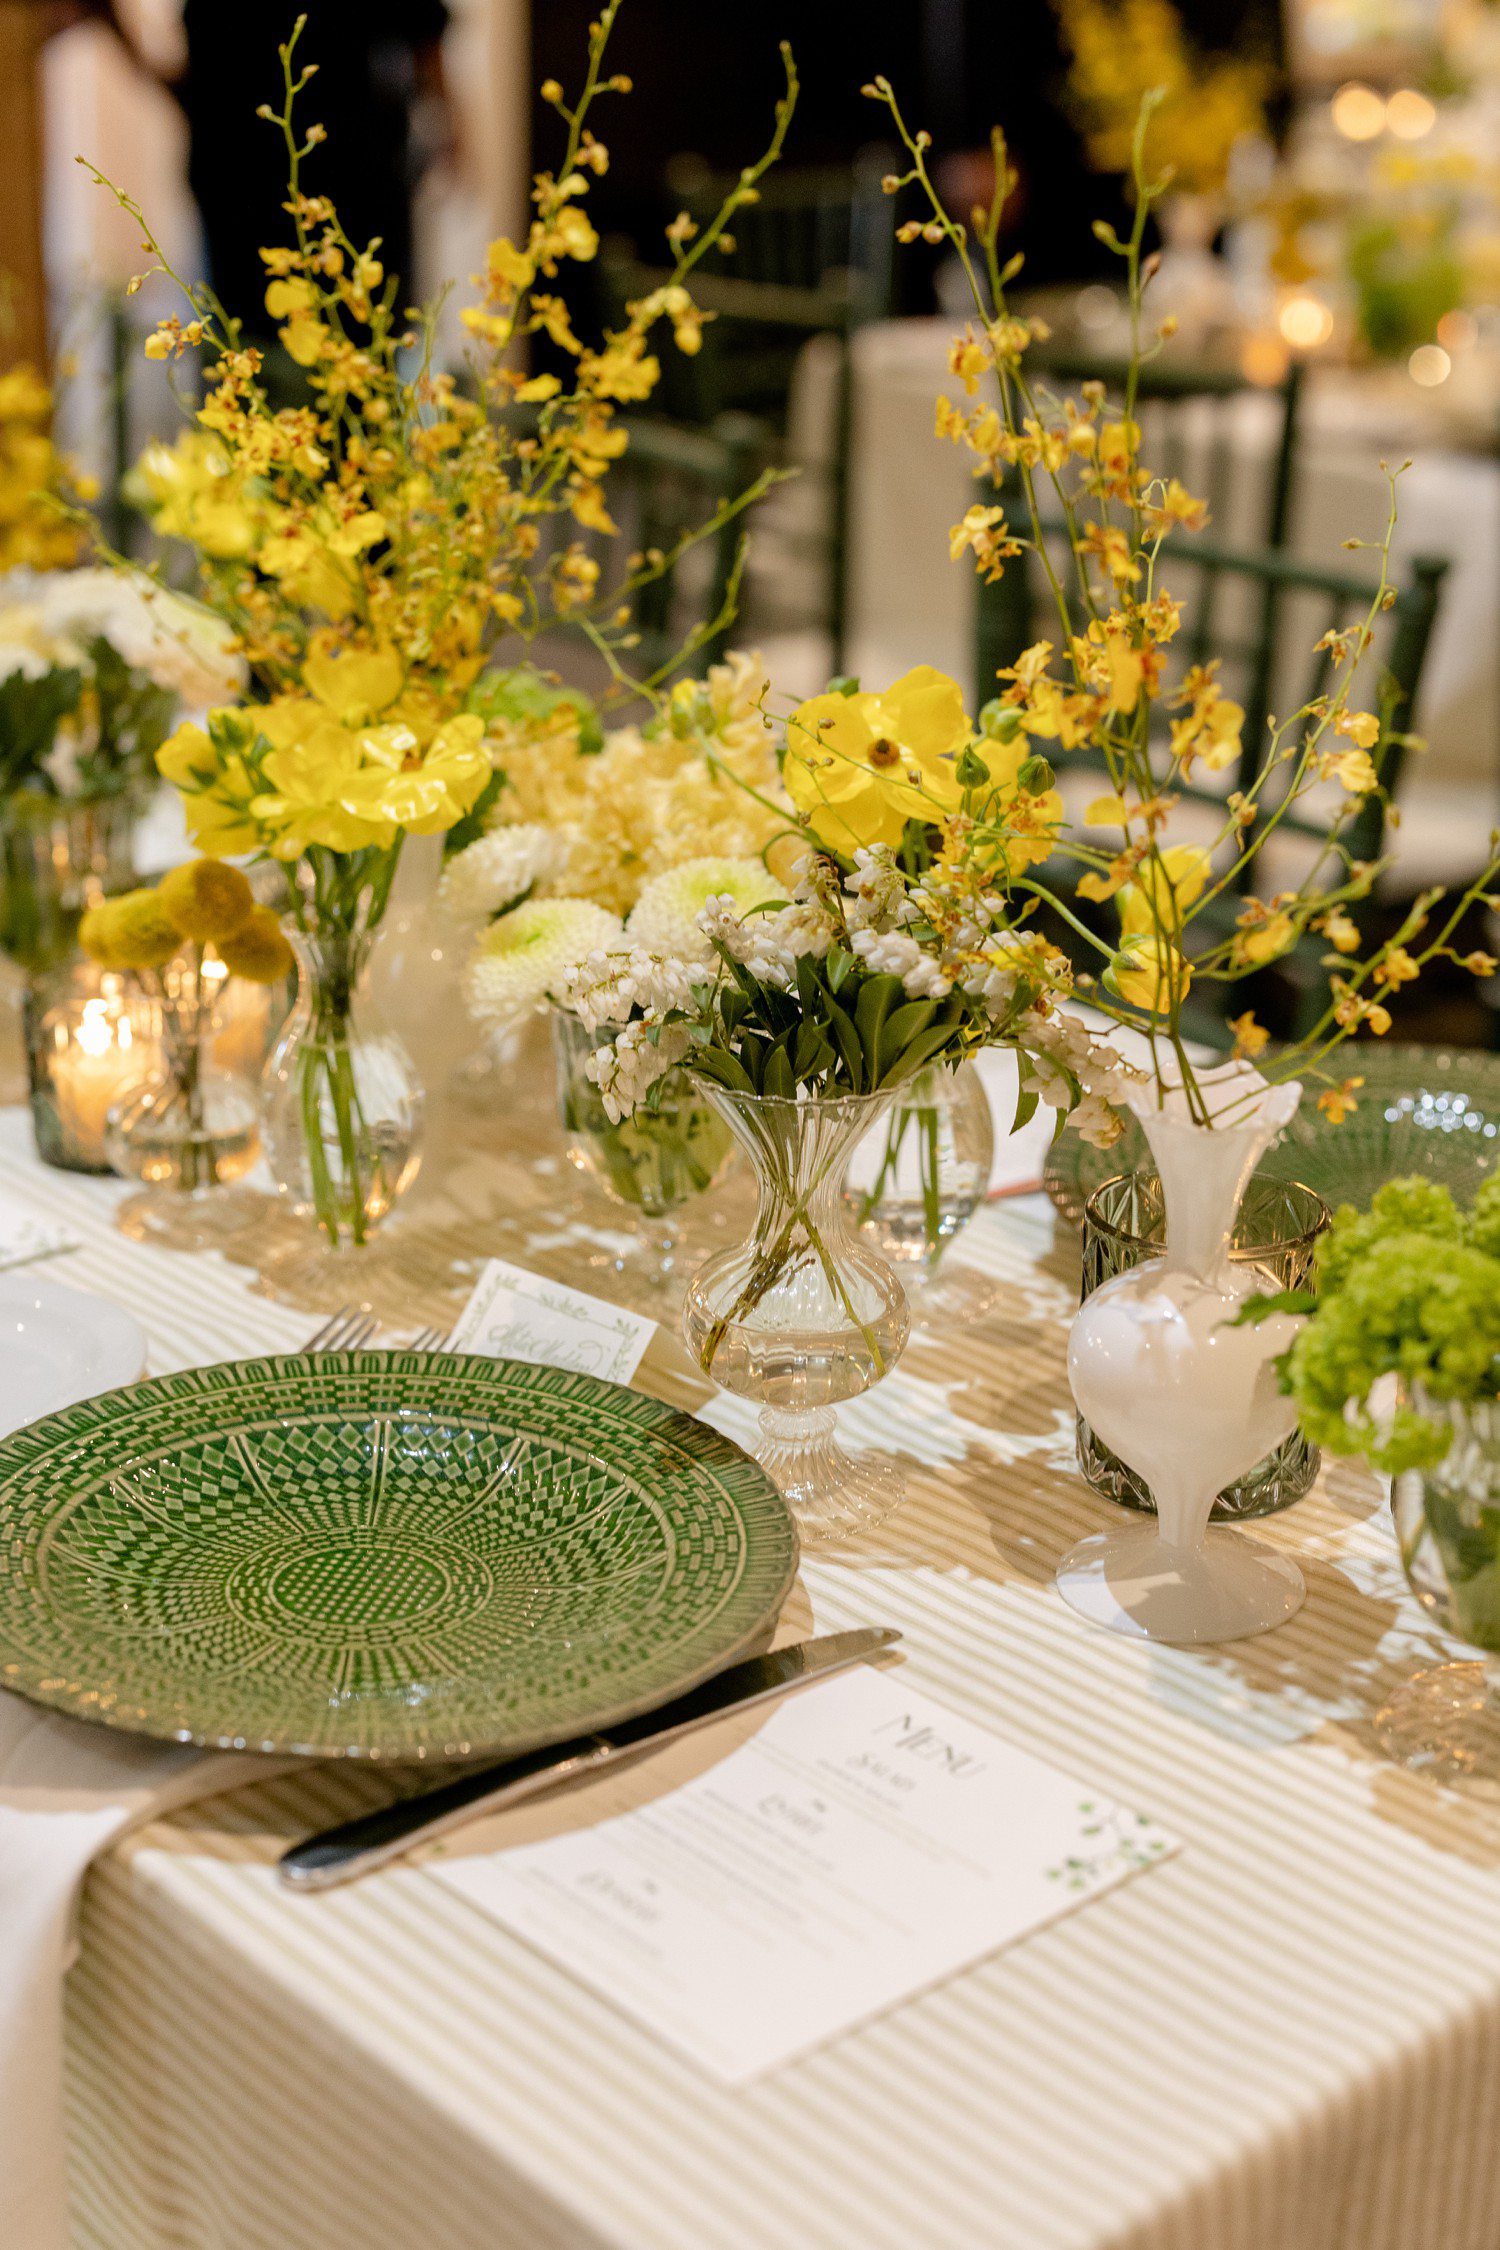 Yellow flowers and green flatware for wedding rehearsal table decor.